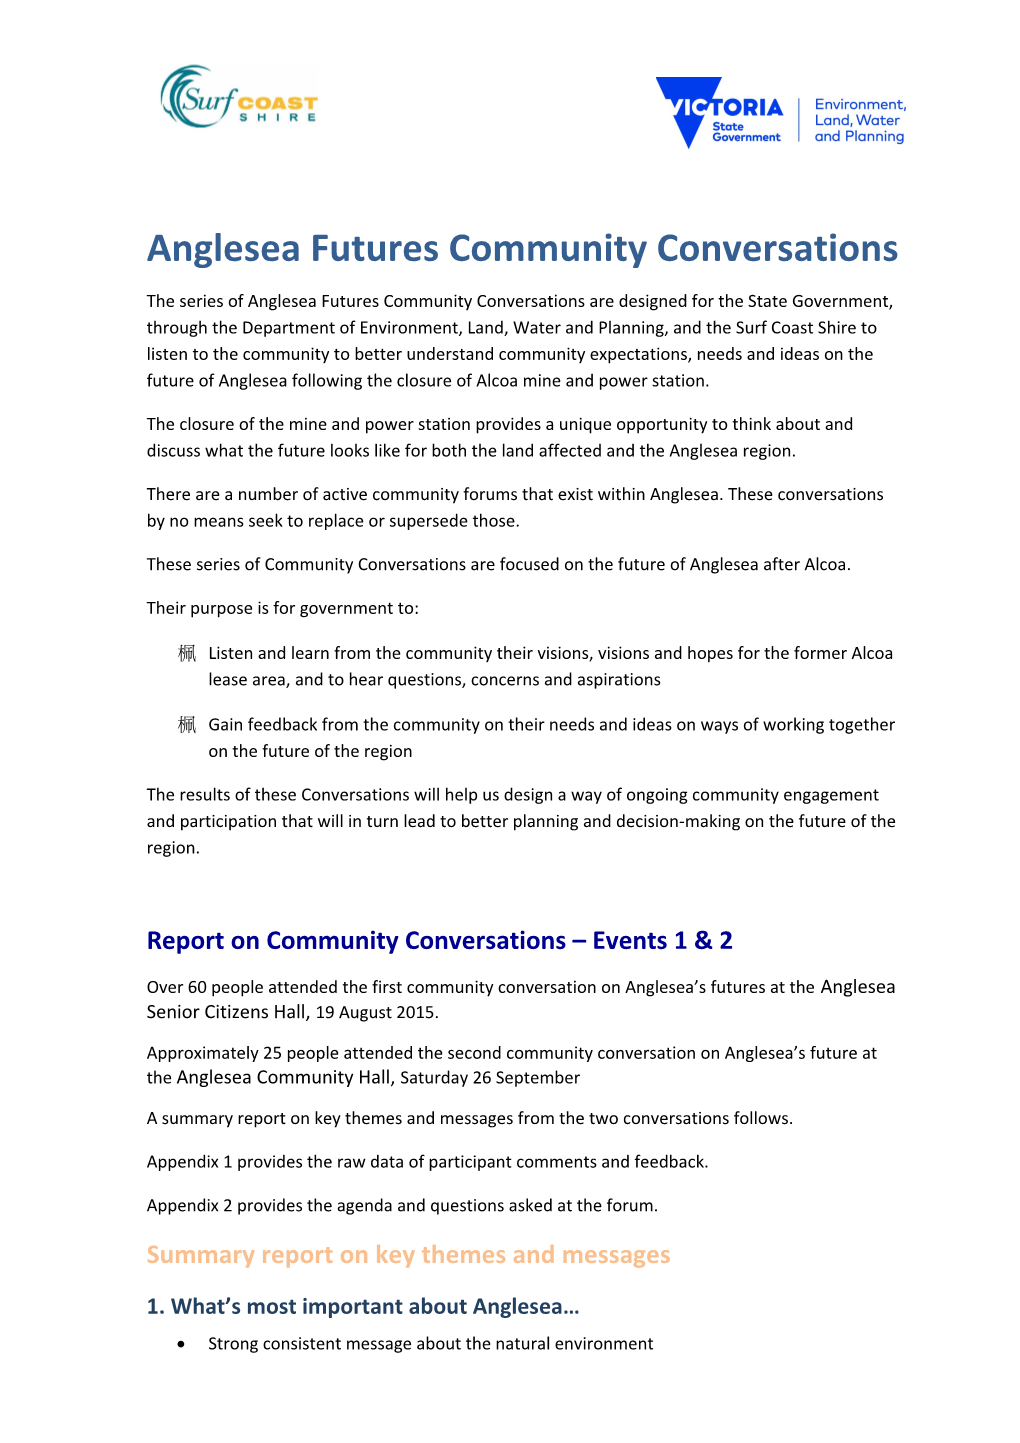 Anglesea Futures: Community Conversation Number 1